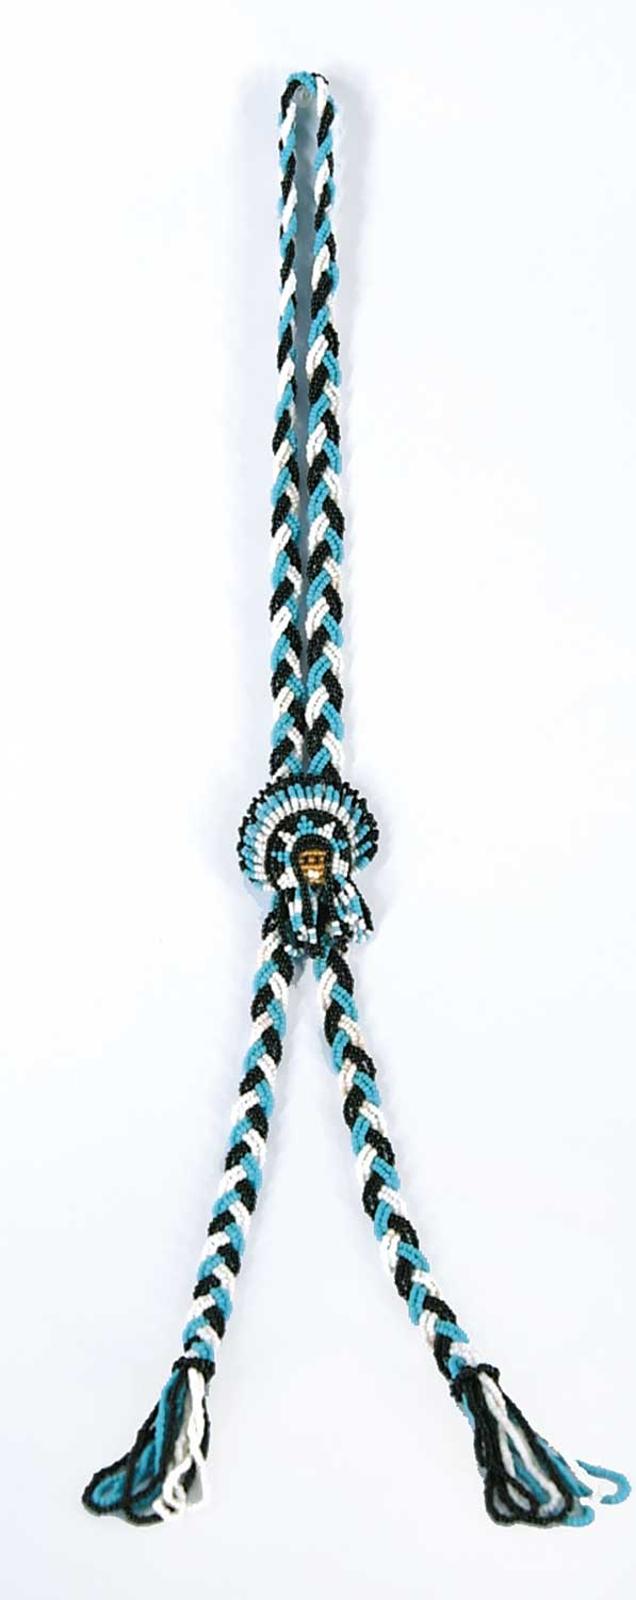 Robert Charles Aller (1922-2008) - Untitled - Braided Bead Bolo Tie Necklace